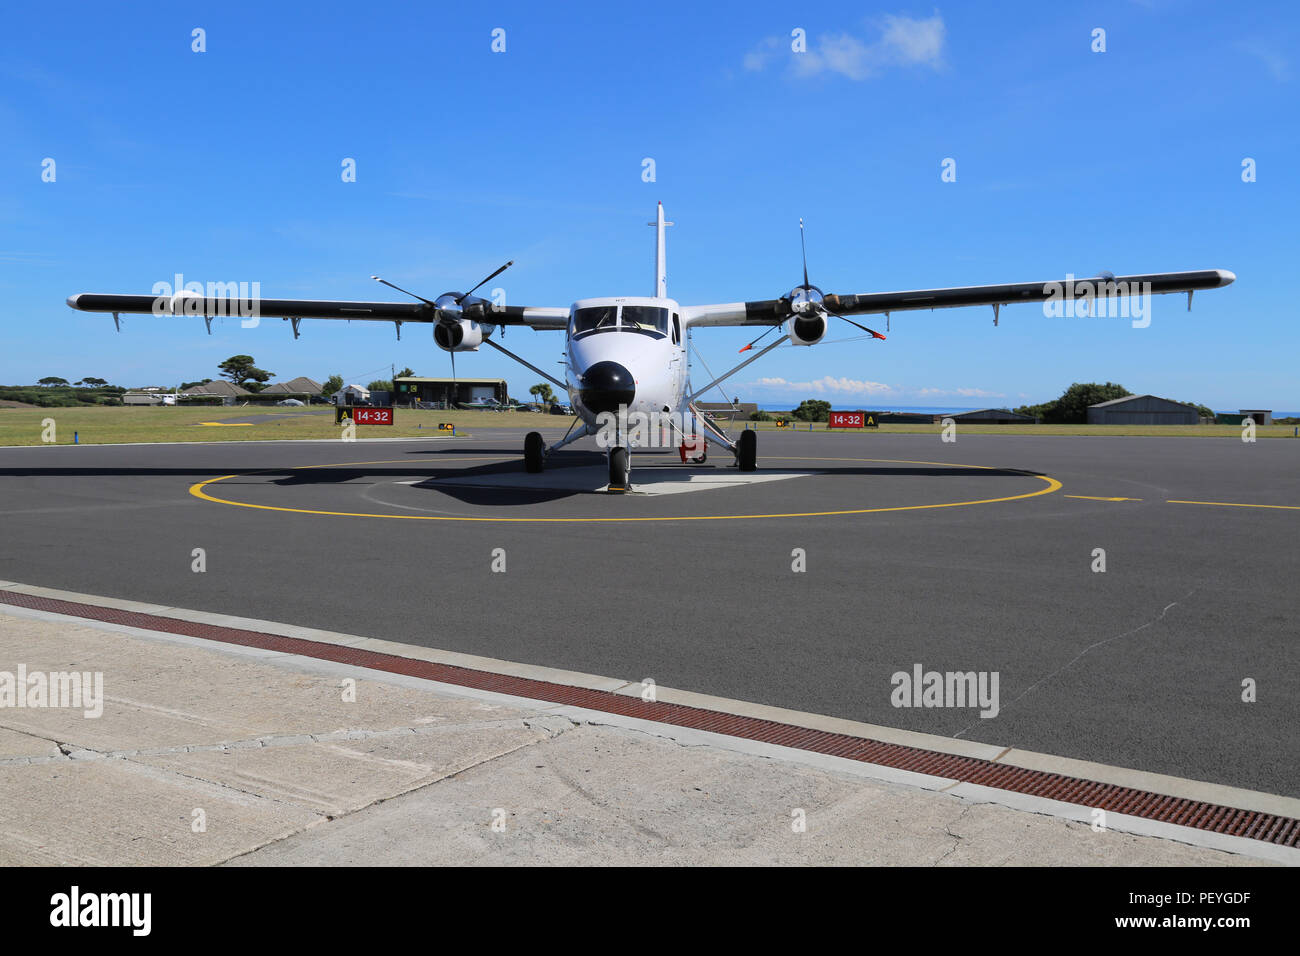 Isles of Scilly Skybus de Havilland Canada Twin Otter in St Mary's Airport, St Mary's, Scilly-inseln, Großbritannien Stockfoto